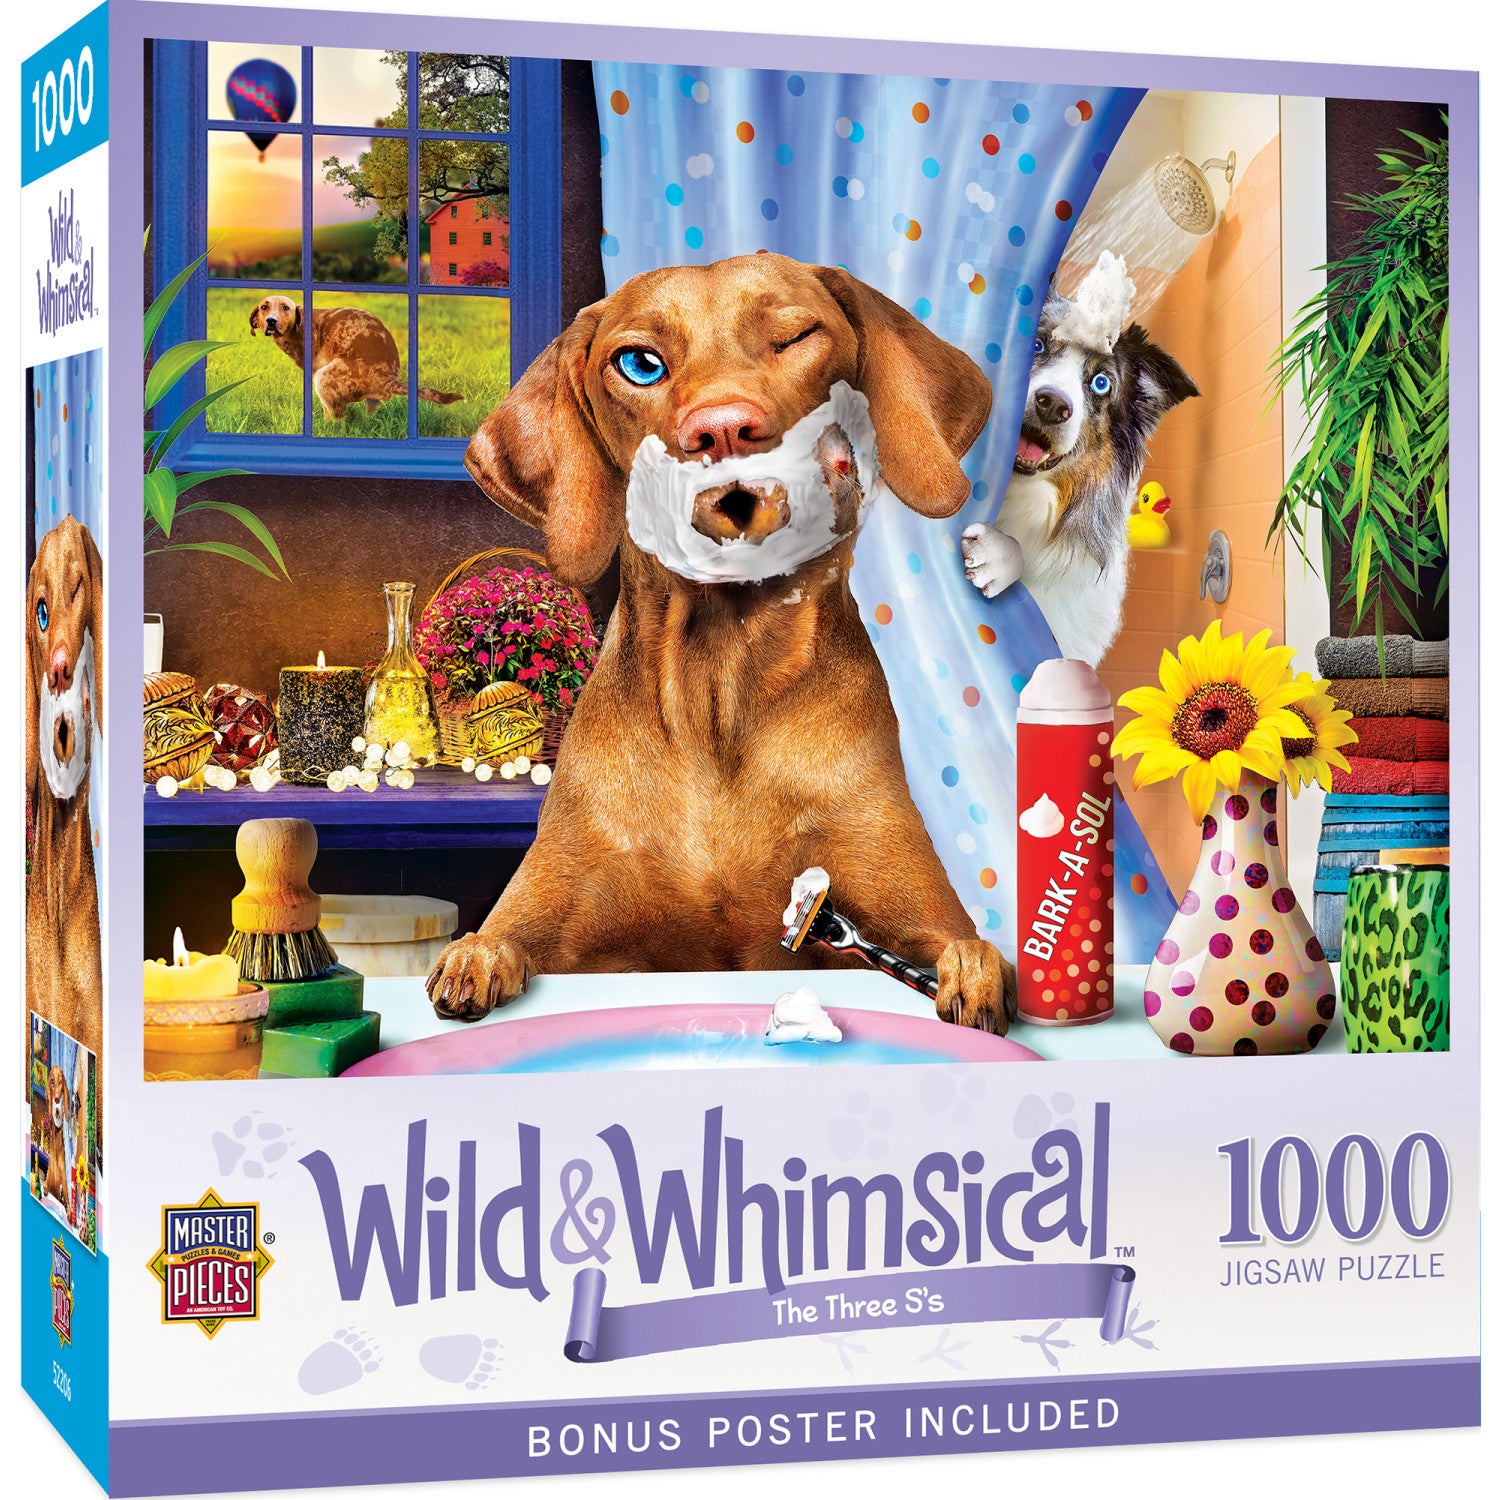 Wild & Whimsical - The Three S's 1000 Piece Puzzle